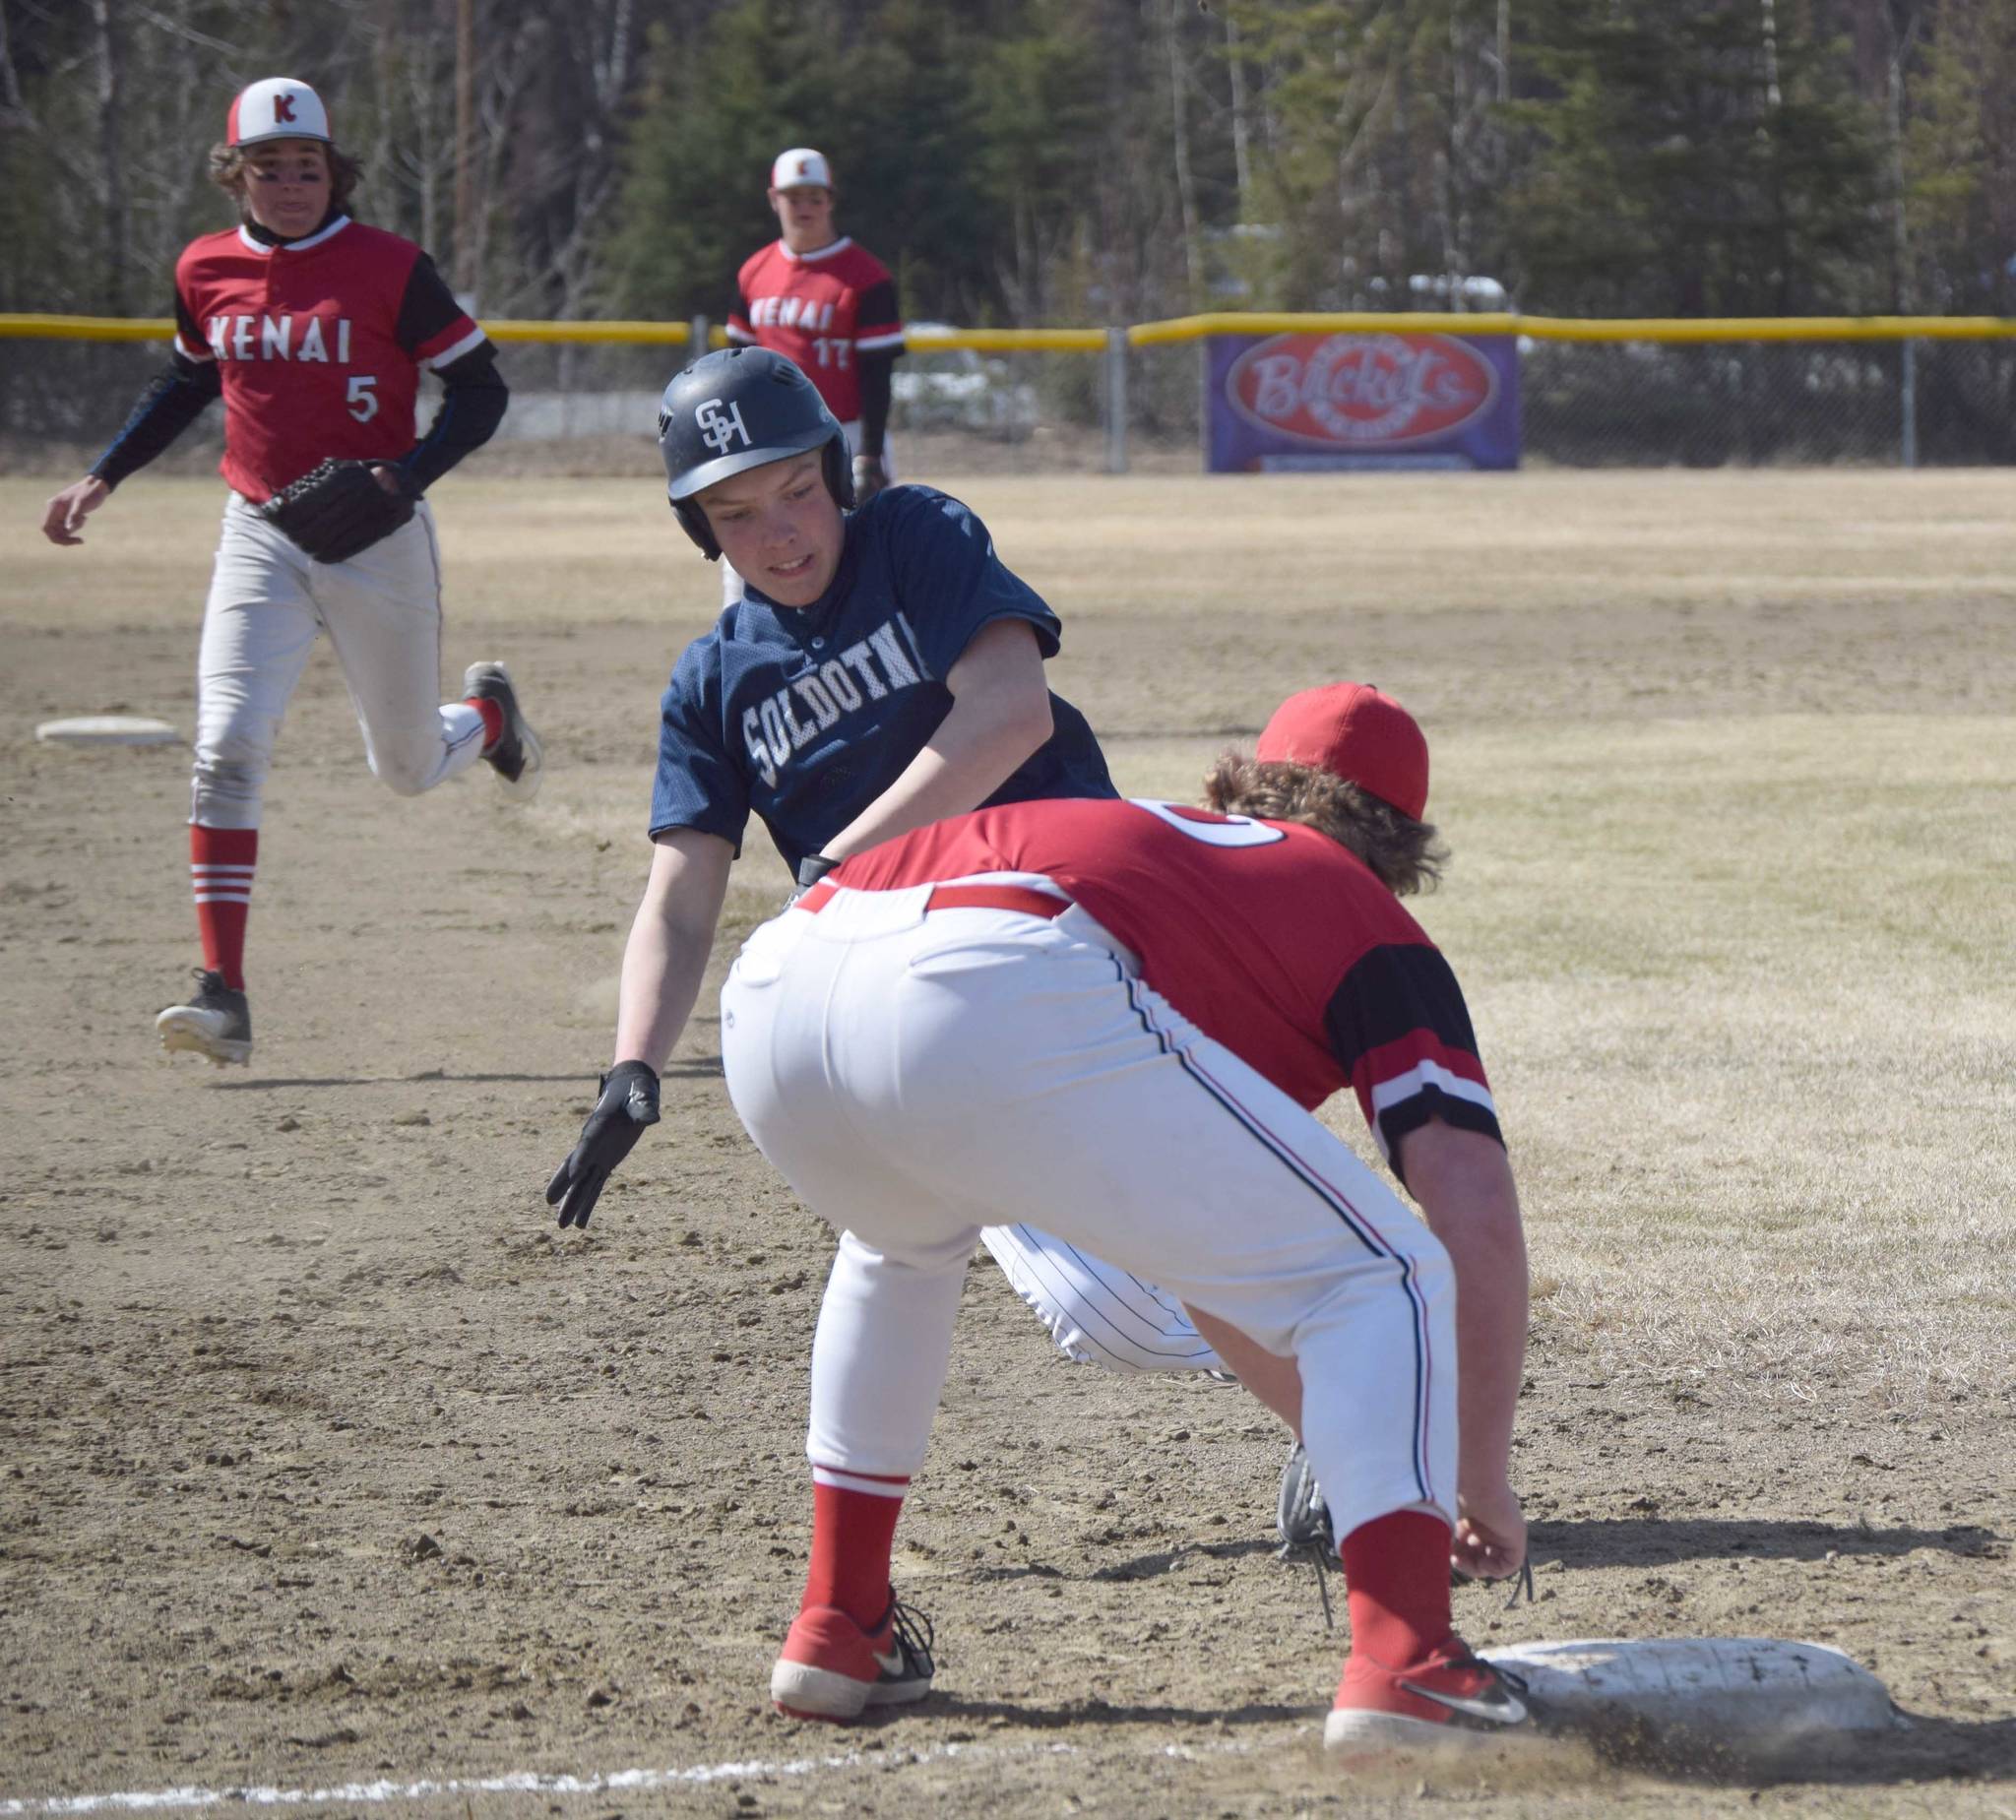 Kenai Central third baseman Charlie Chamberlain gets ready to tag out Soldotna’s Dylan Davidhizar on Tuesday, May 4, 2021, at the Soldotna Little League fields in Soldotna, Alaska. (Photo by Jeff Helminiak/Peninsula Clarion)